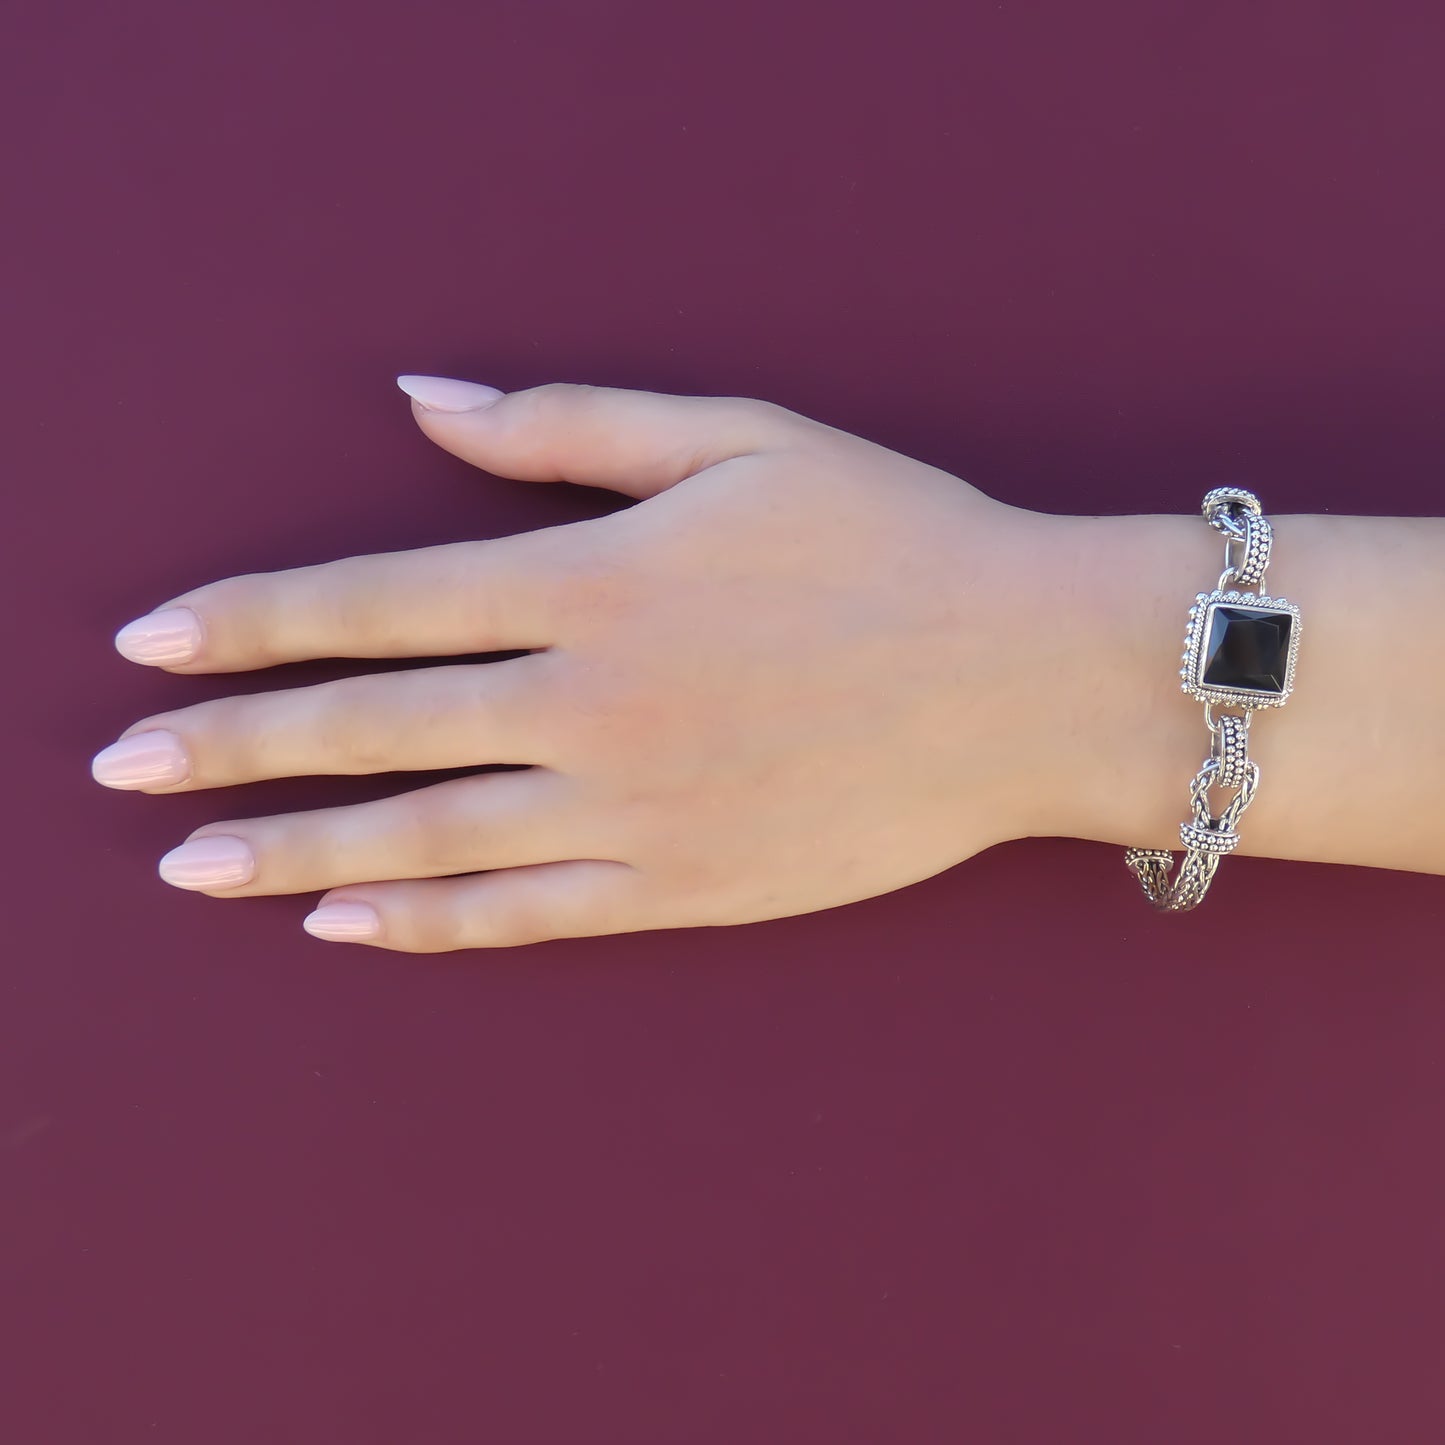 Woman wearing a silver bracelet with a faceted black onyx gemstone.